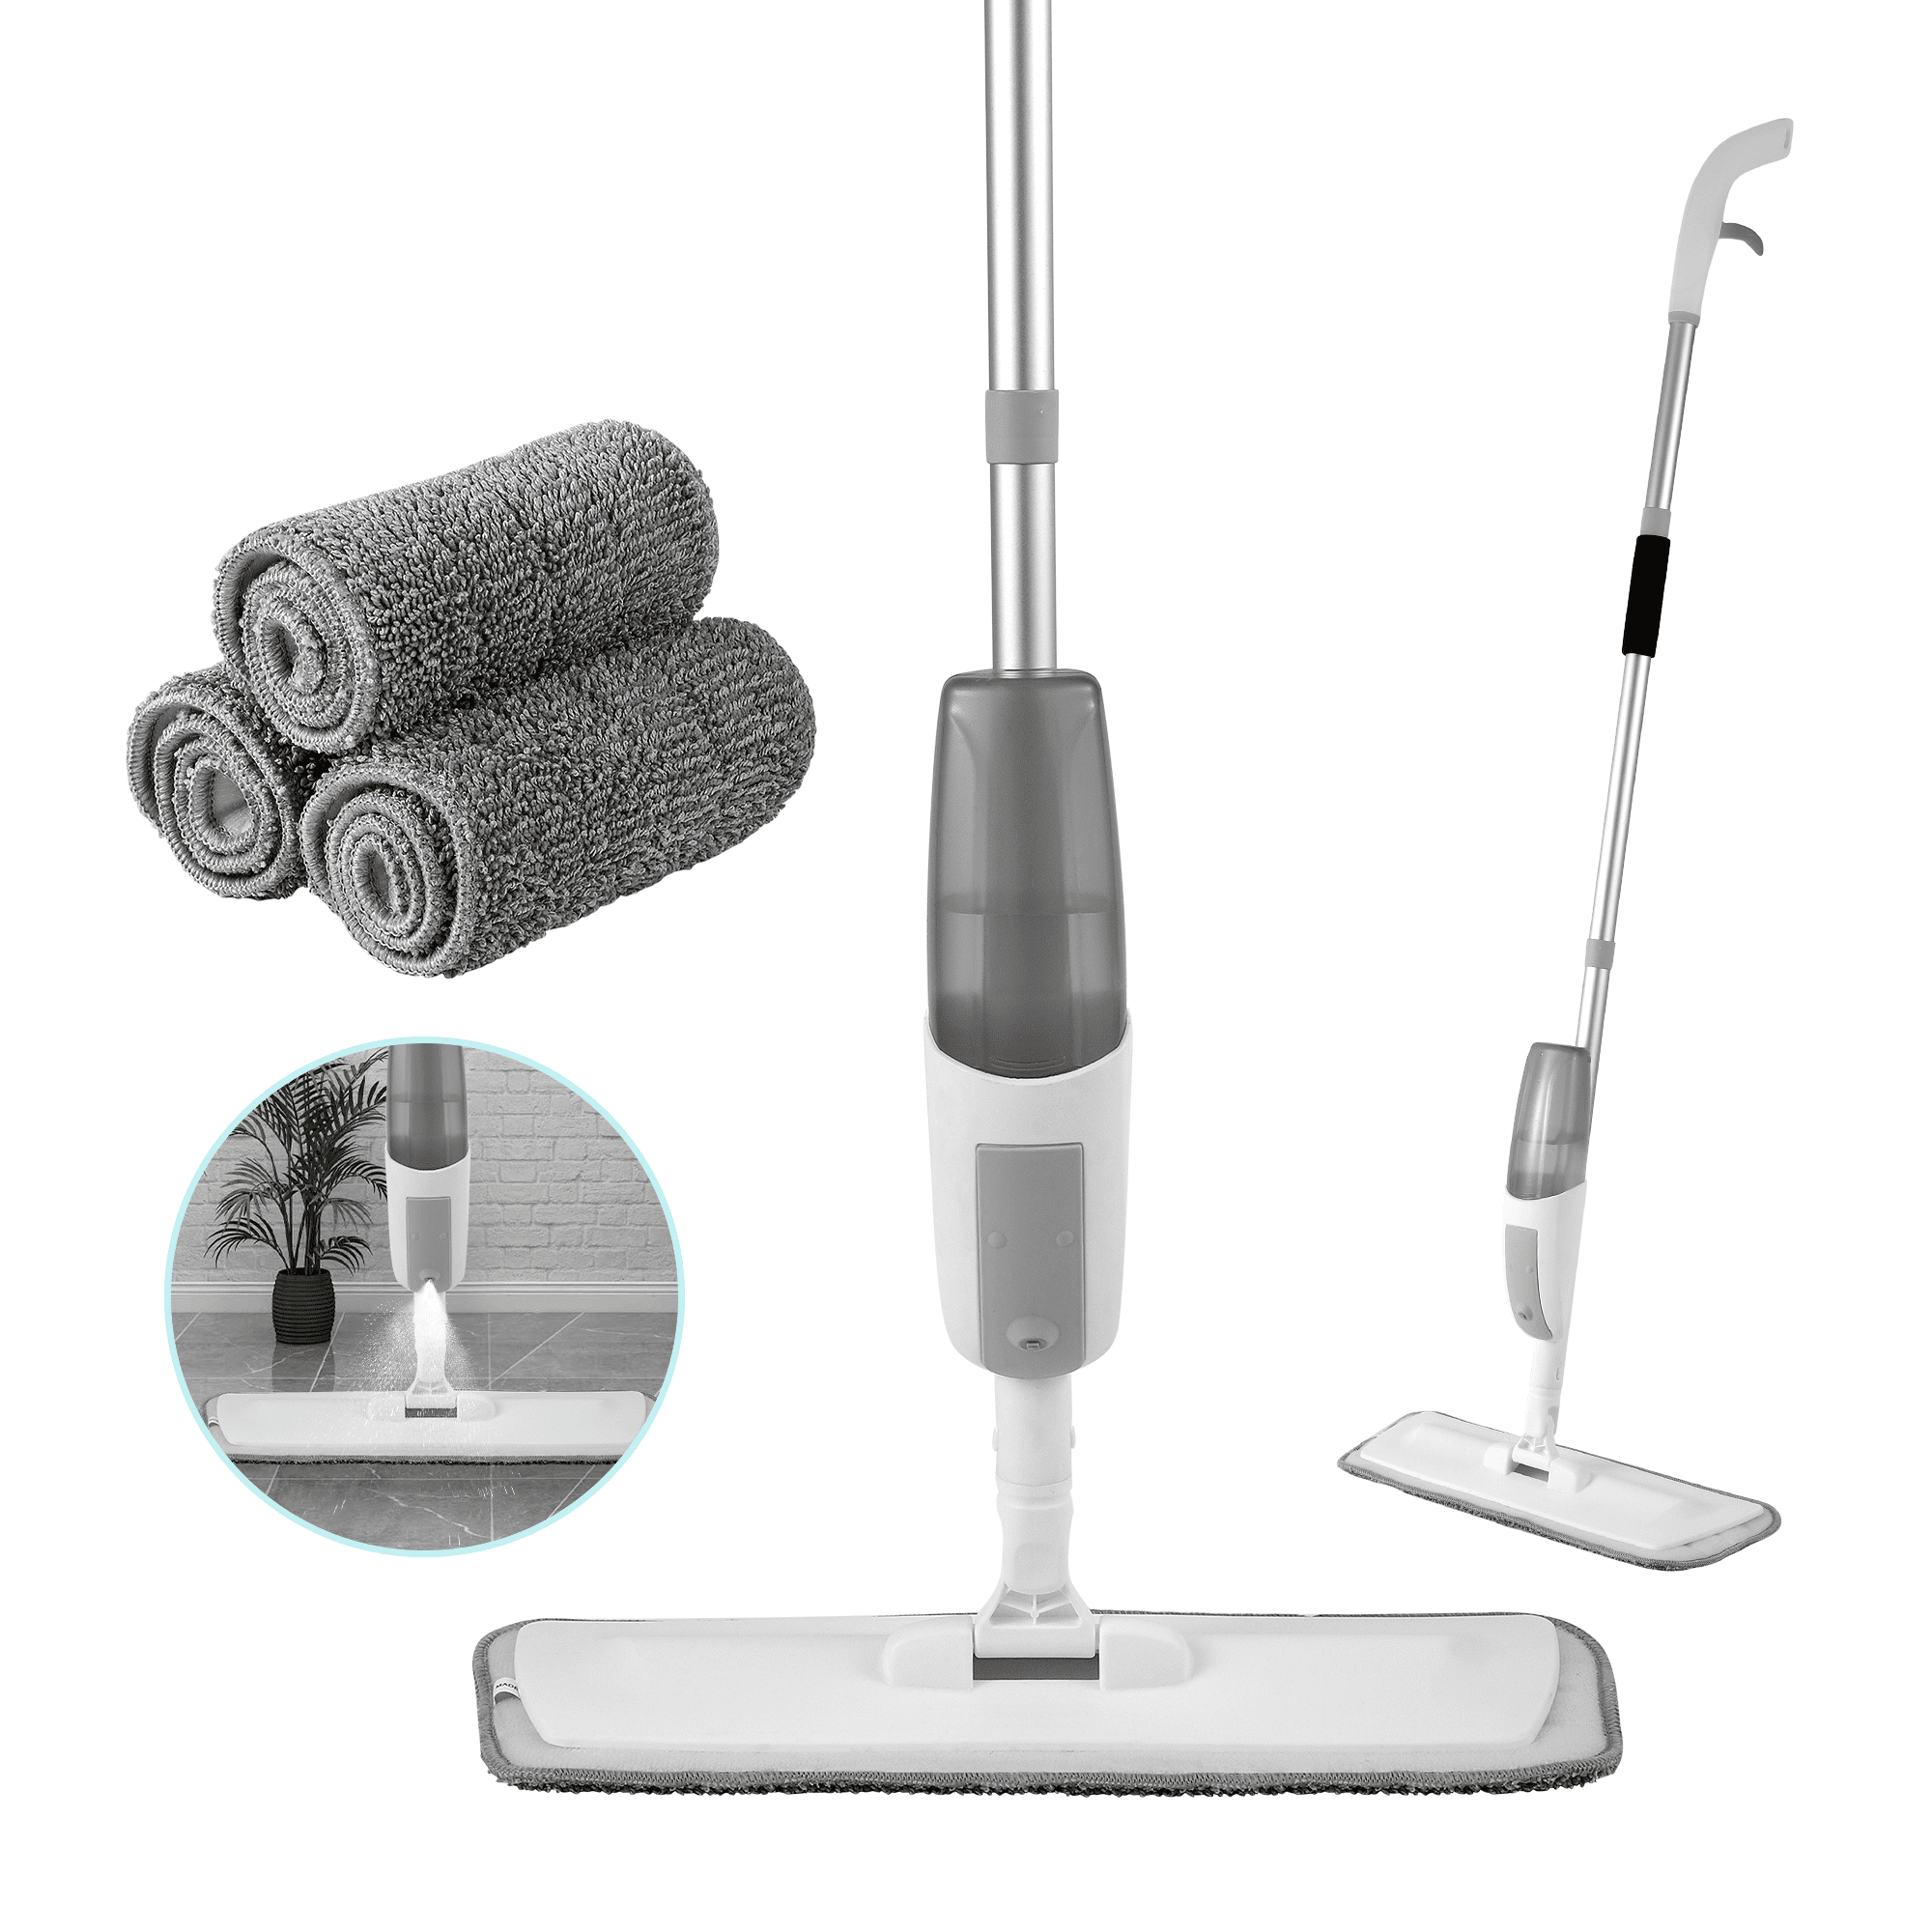 SDARISB Mops for Floor Cleaning Wet Spray Mop with 6 Washable Microfiber Pads 1 Scraper 1 Mop Holder,Wood Floor Mop for Home or Commercial Dry Wet Use